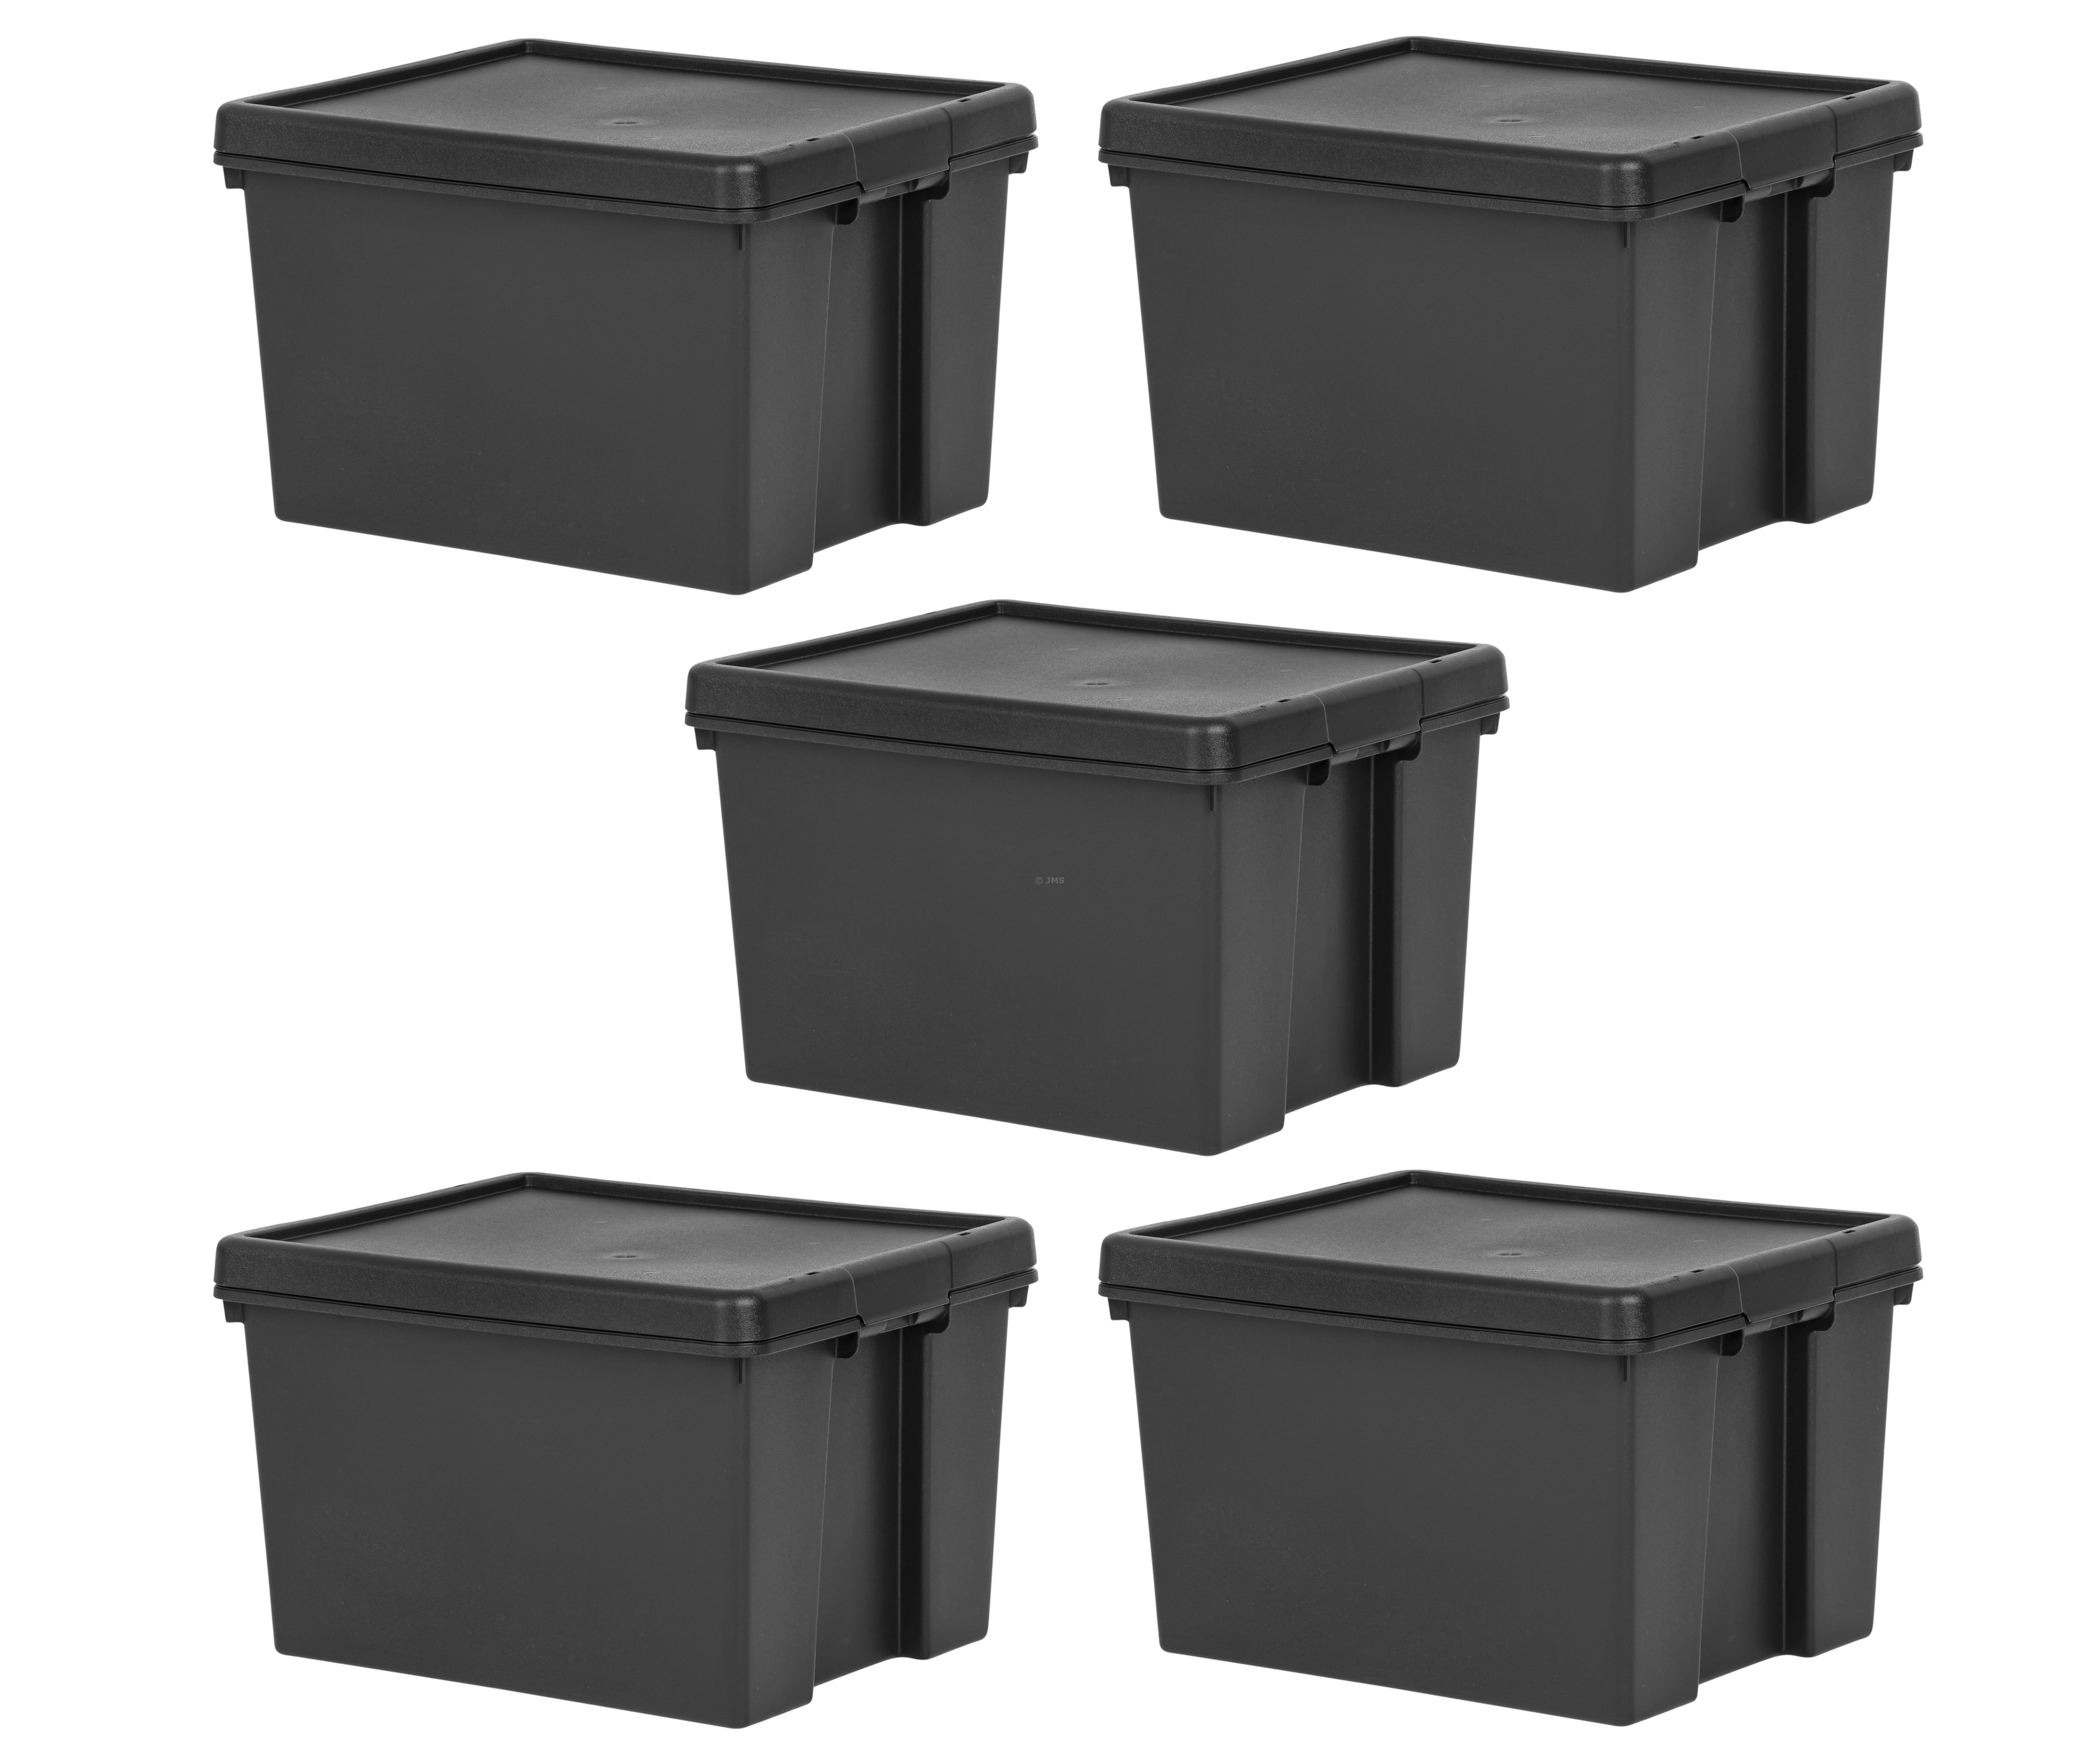 5 x 45L Black Stackable Storage Box with Lid Heavy Duty Recycled Plastic Nestable Containers Home Office Garage Toolbox